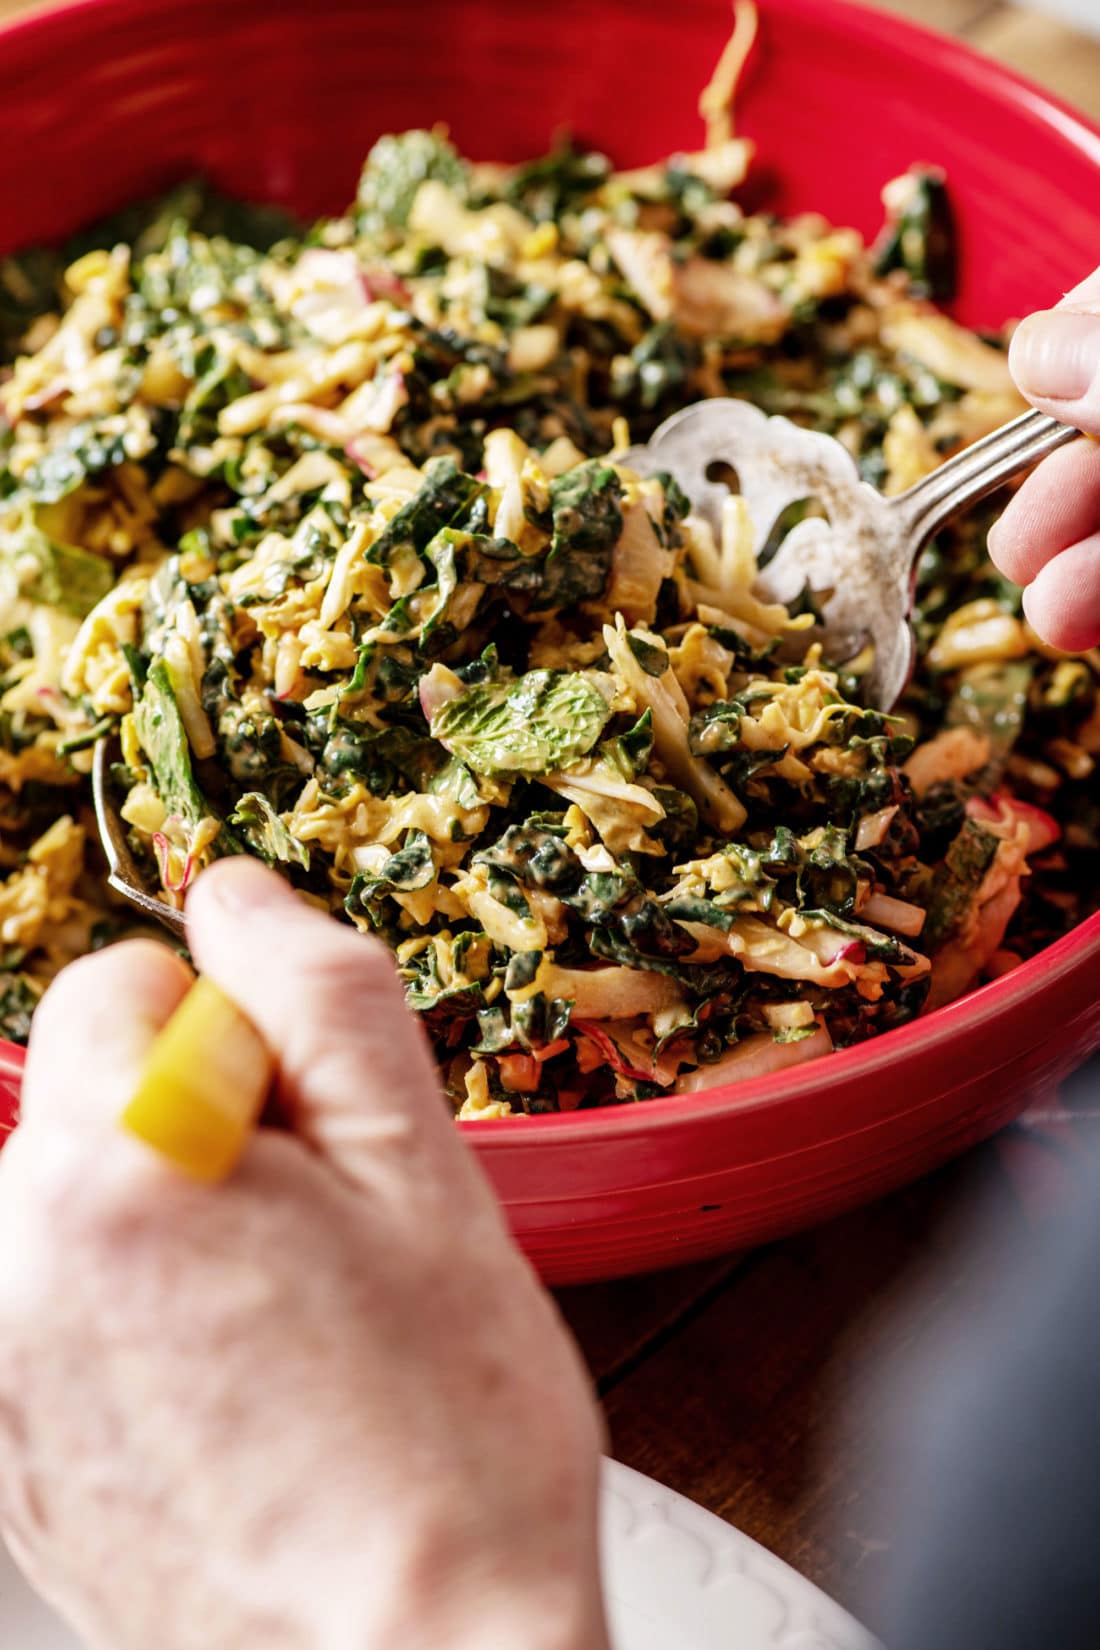 Kale, Cabbage and Mint Salad with Peanut Dressing